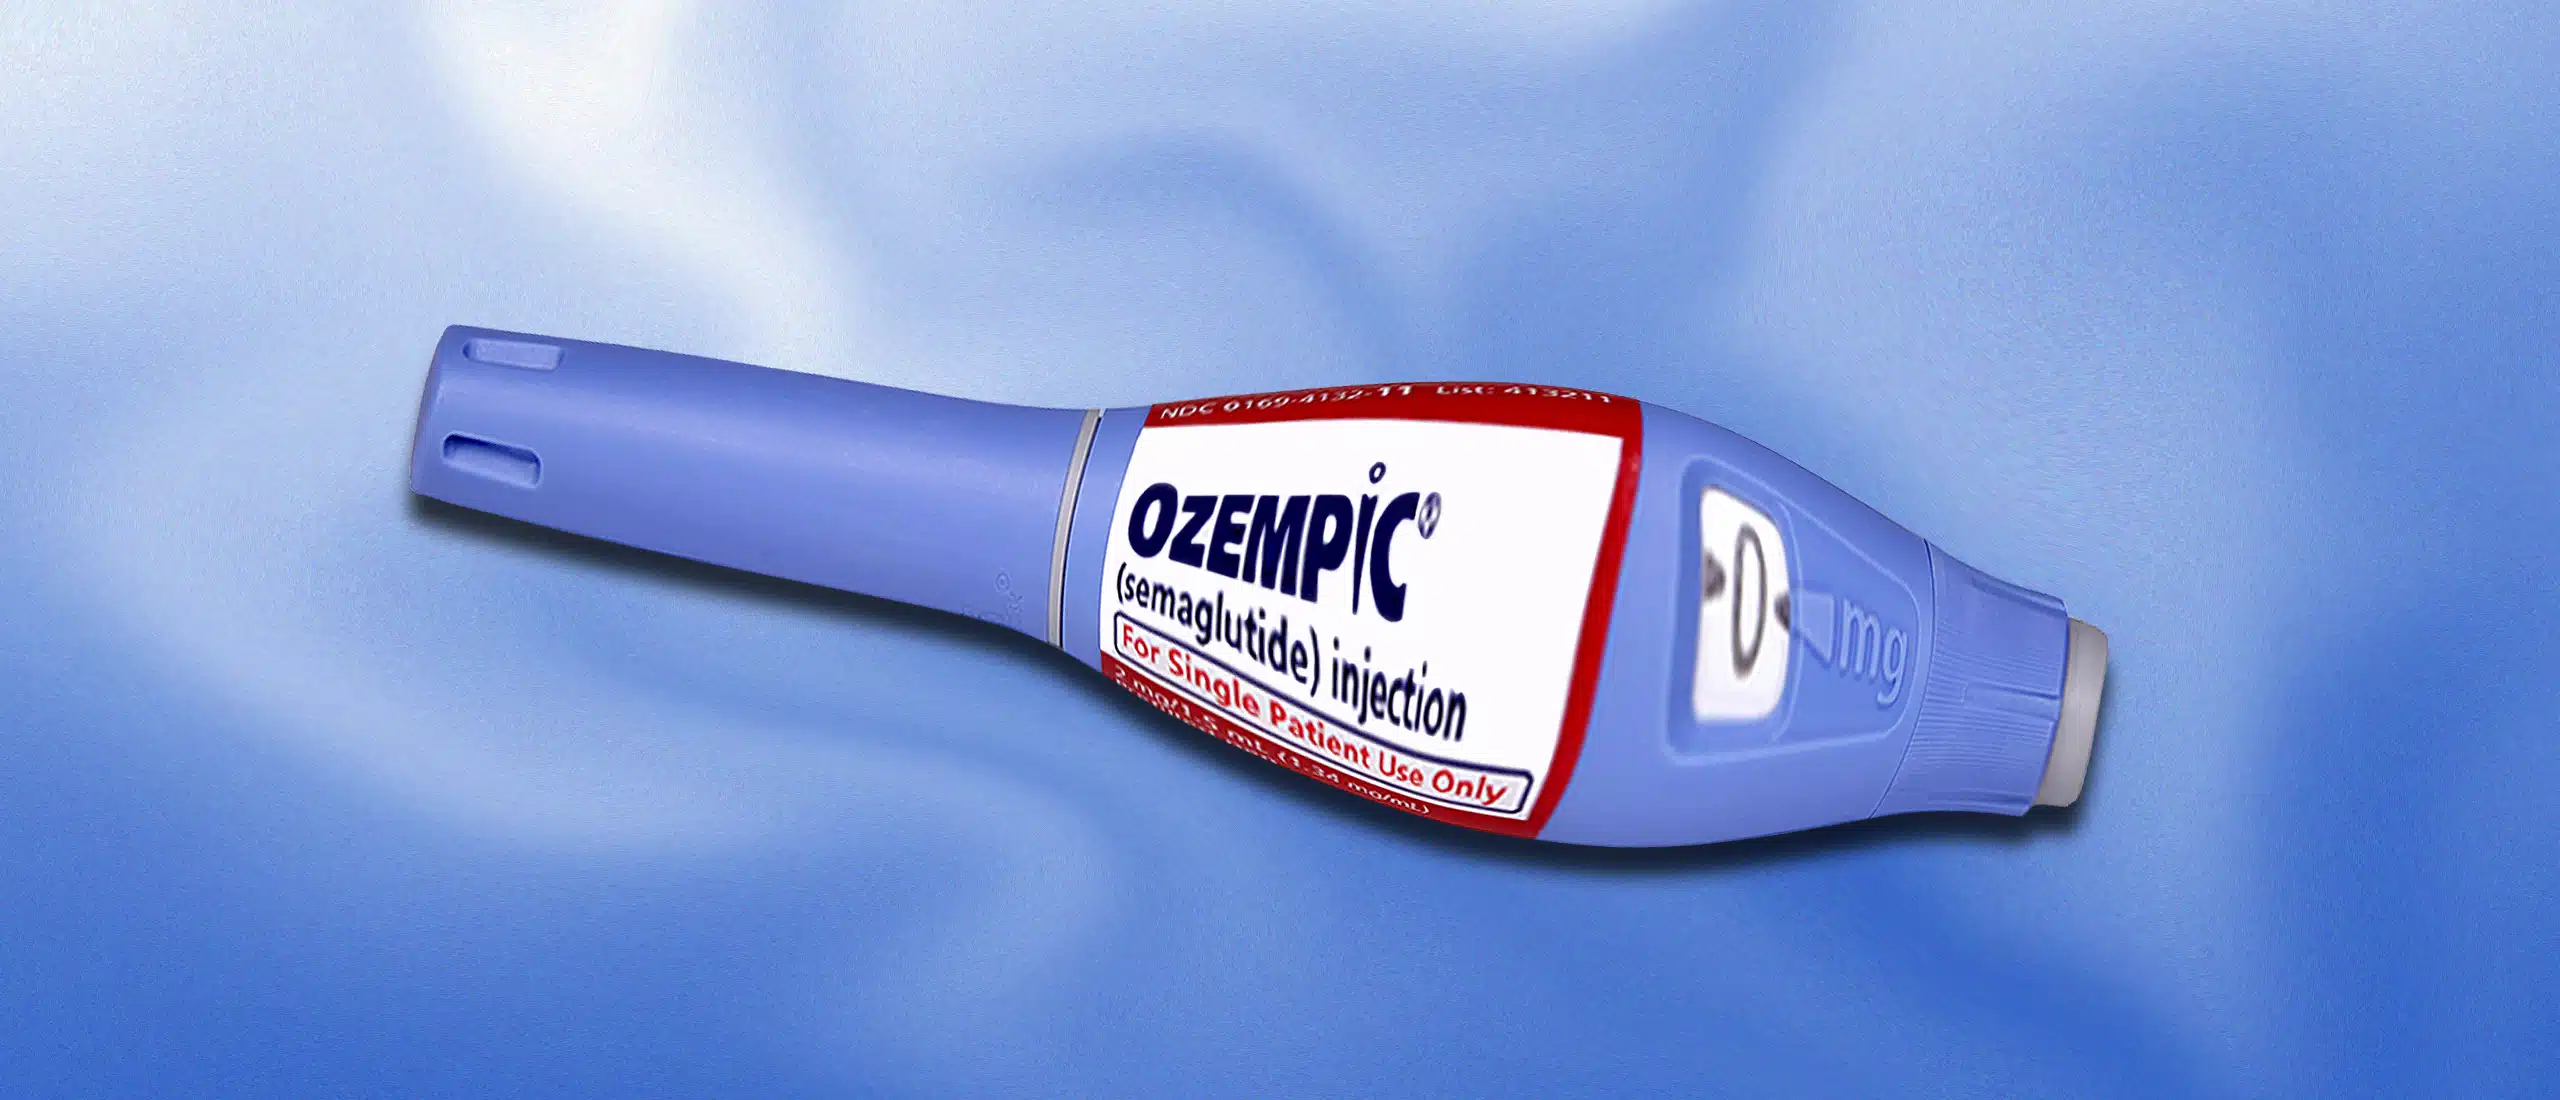 An engorged ozempic injector pen on a blue background